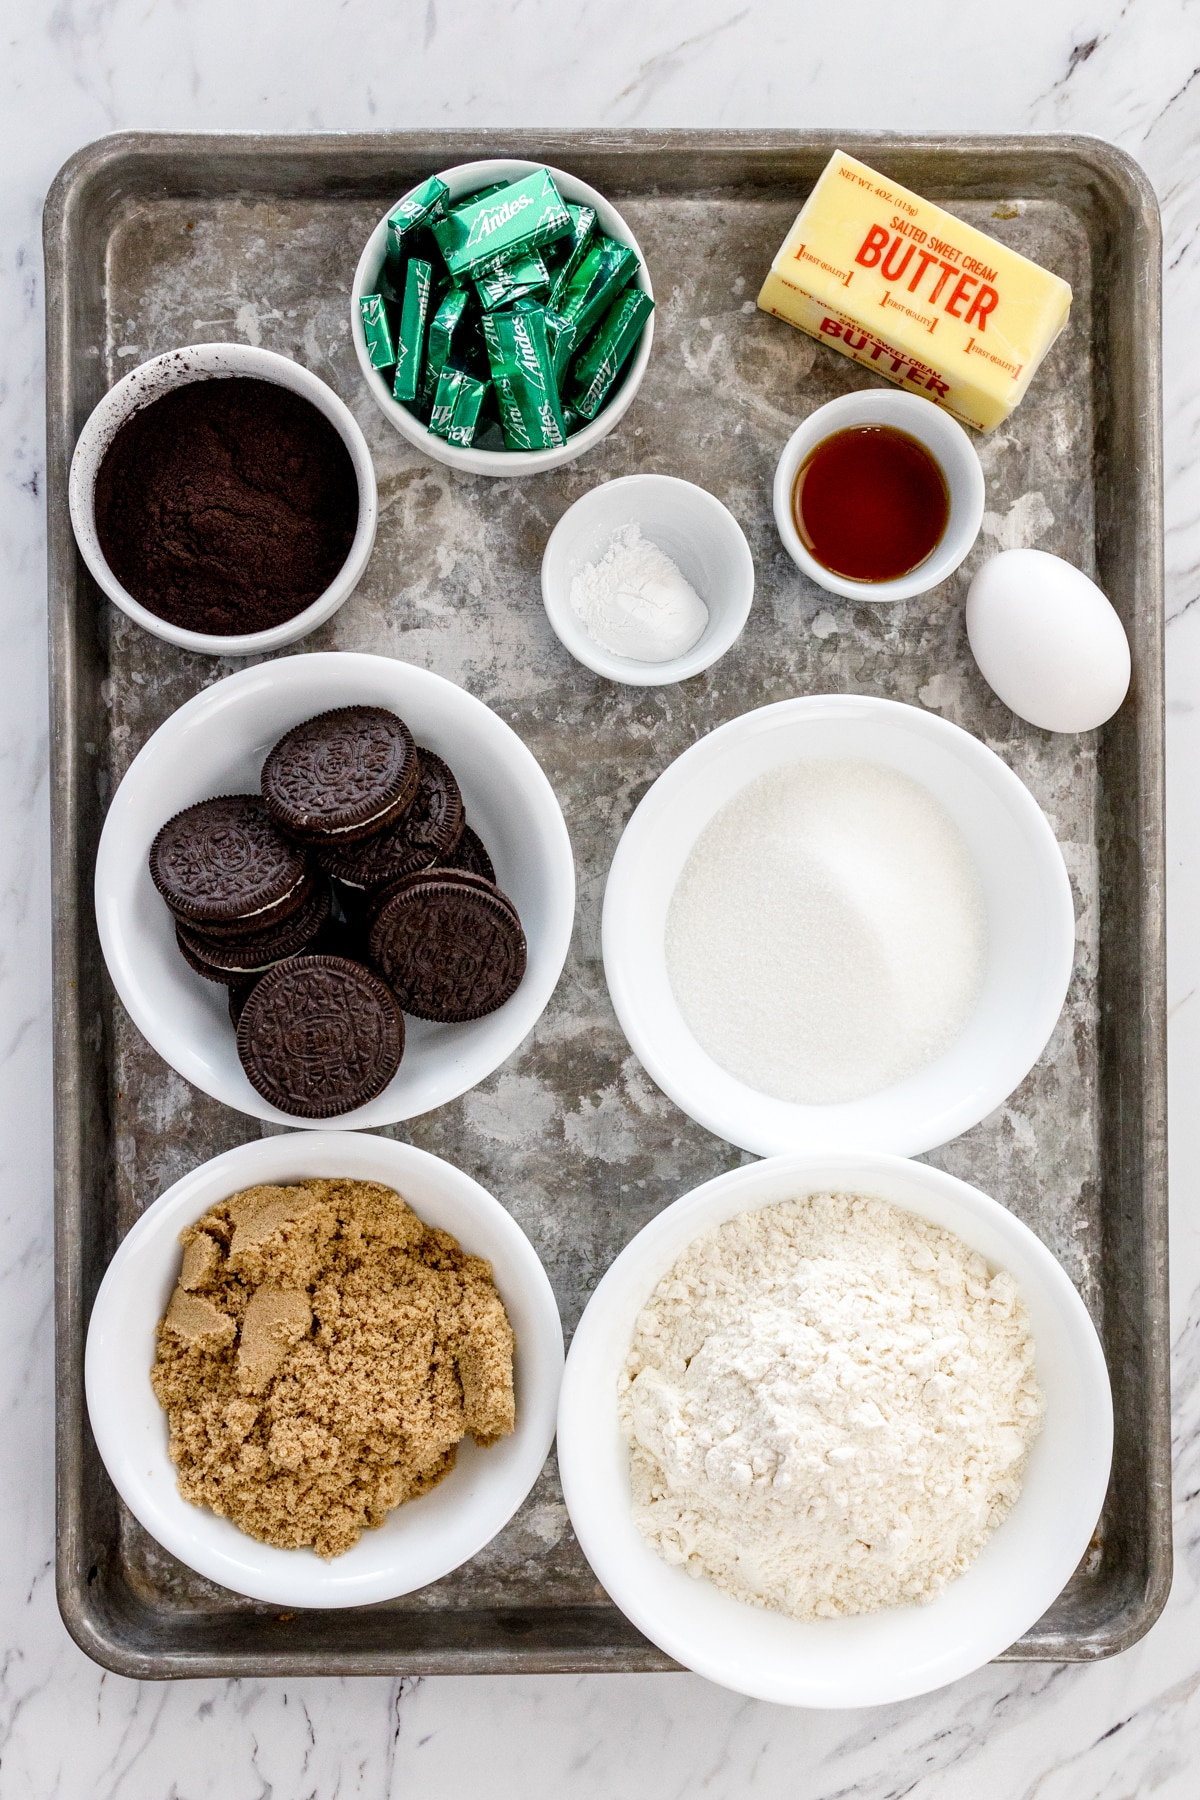 Top view of ingredients needed to make Frosted Mint Oreo Cookies in small bowls on a baking tray.